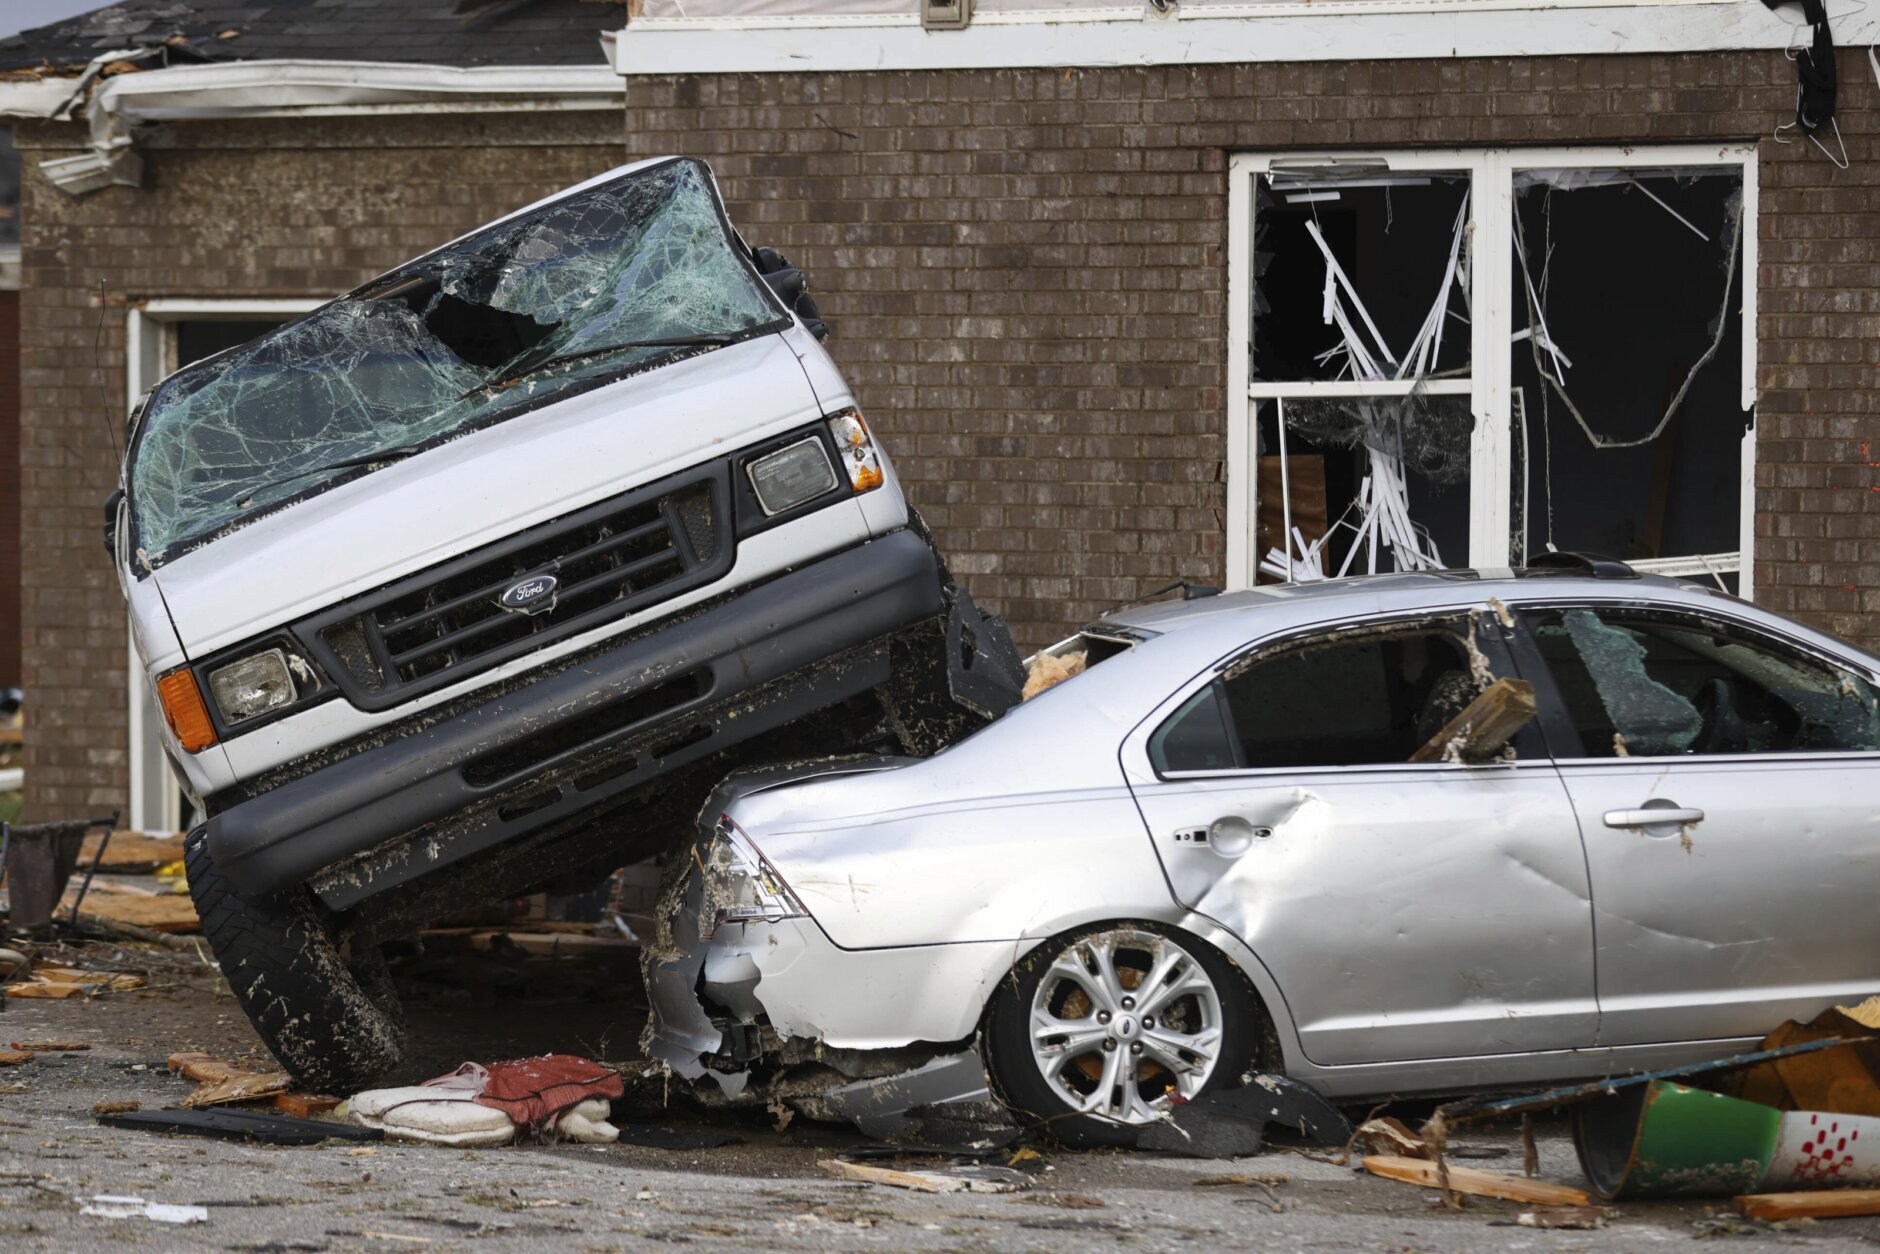 A car wrecked by a tornado sits on top of another car in Bowling Green, Ky., Saturday, Dec. 11, 2021. A monstrous tornado killed dozens of people in Kentucky and the toll was climbing Saturday after severe weather ripped through at least five states, leaving widespread devastation. (AP Photo/Michael Clubb)